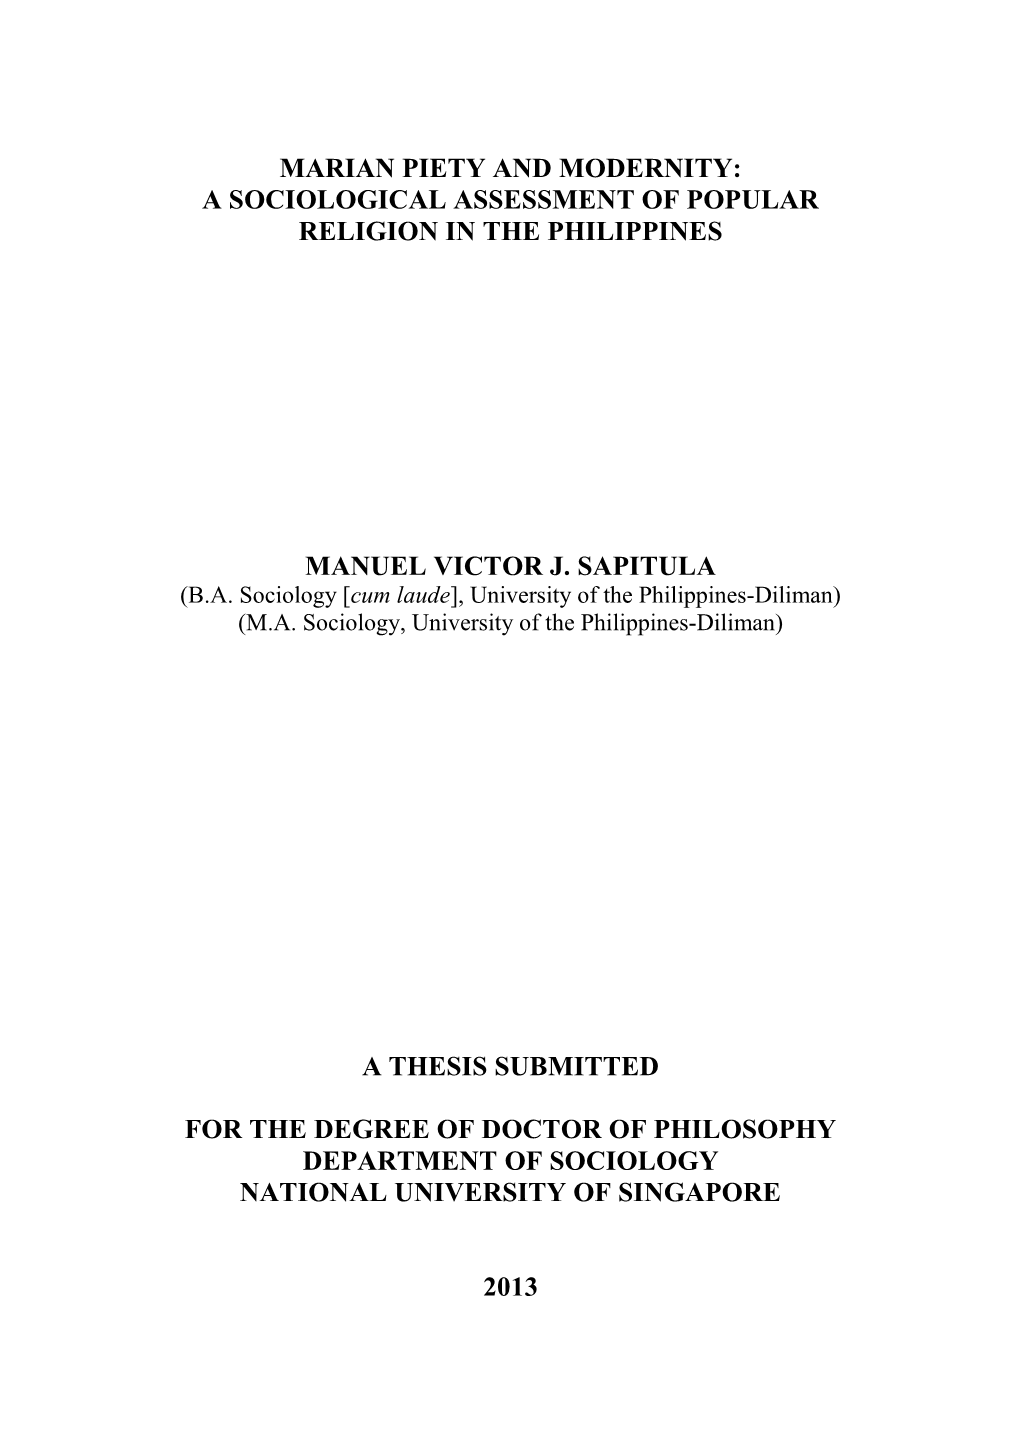 Marian Piety and Modernity: a Sociological Assessment of Popular Religion in the Philippines